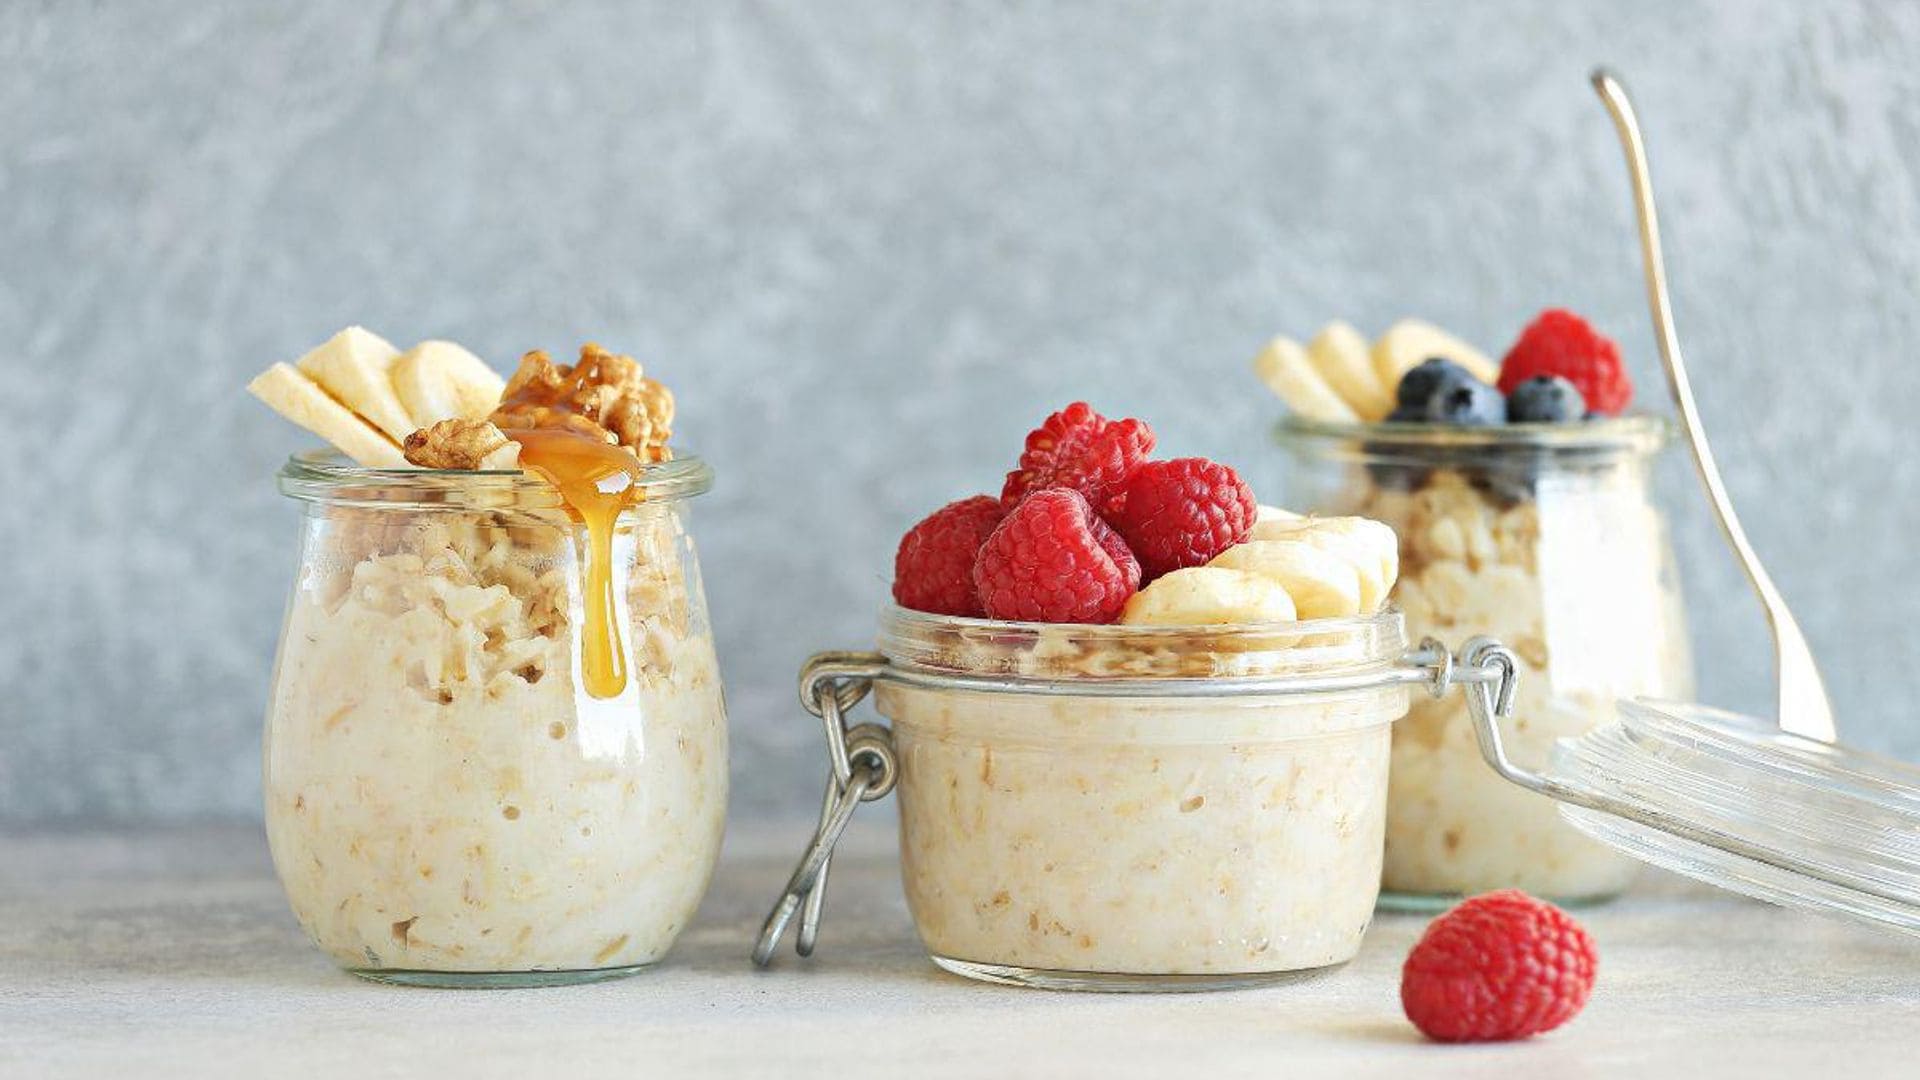 BACK TO SCHOOL QUICK AND EASY NUTRITIOUS BREAKFAST IDEAS